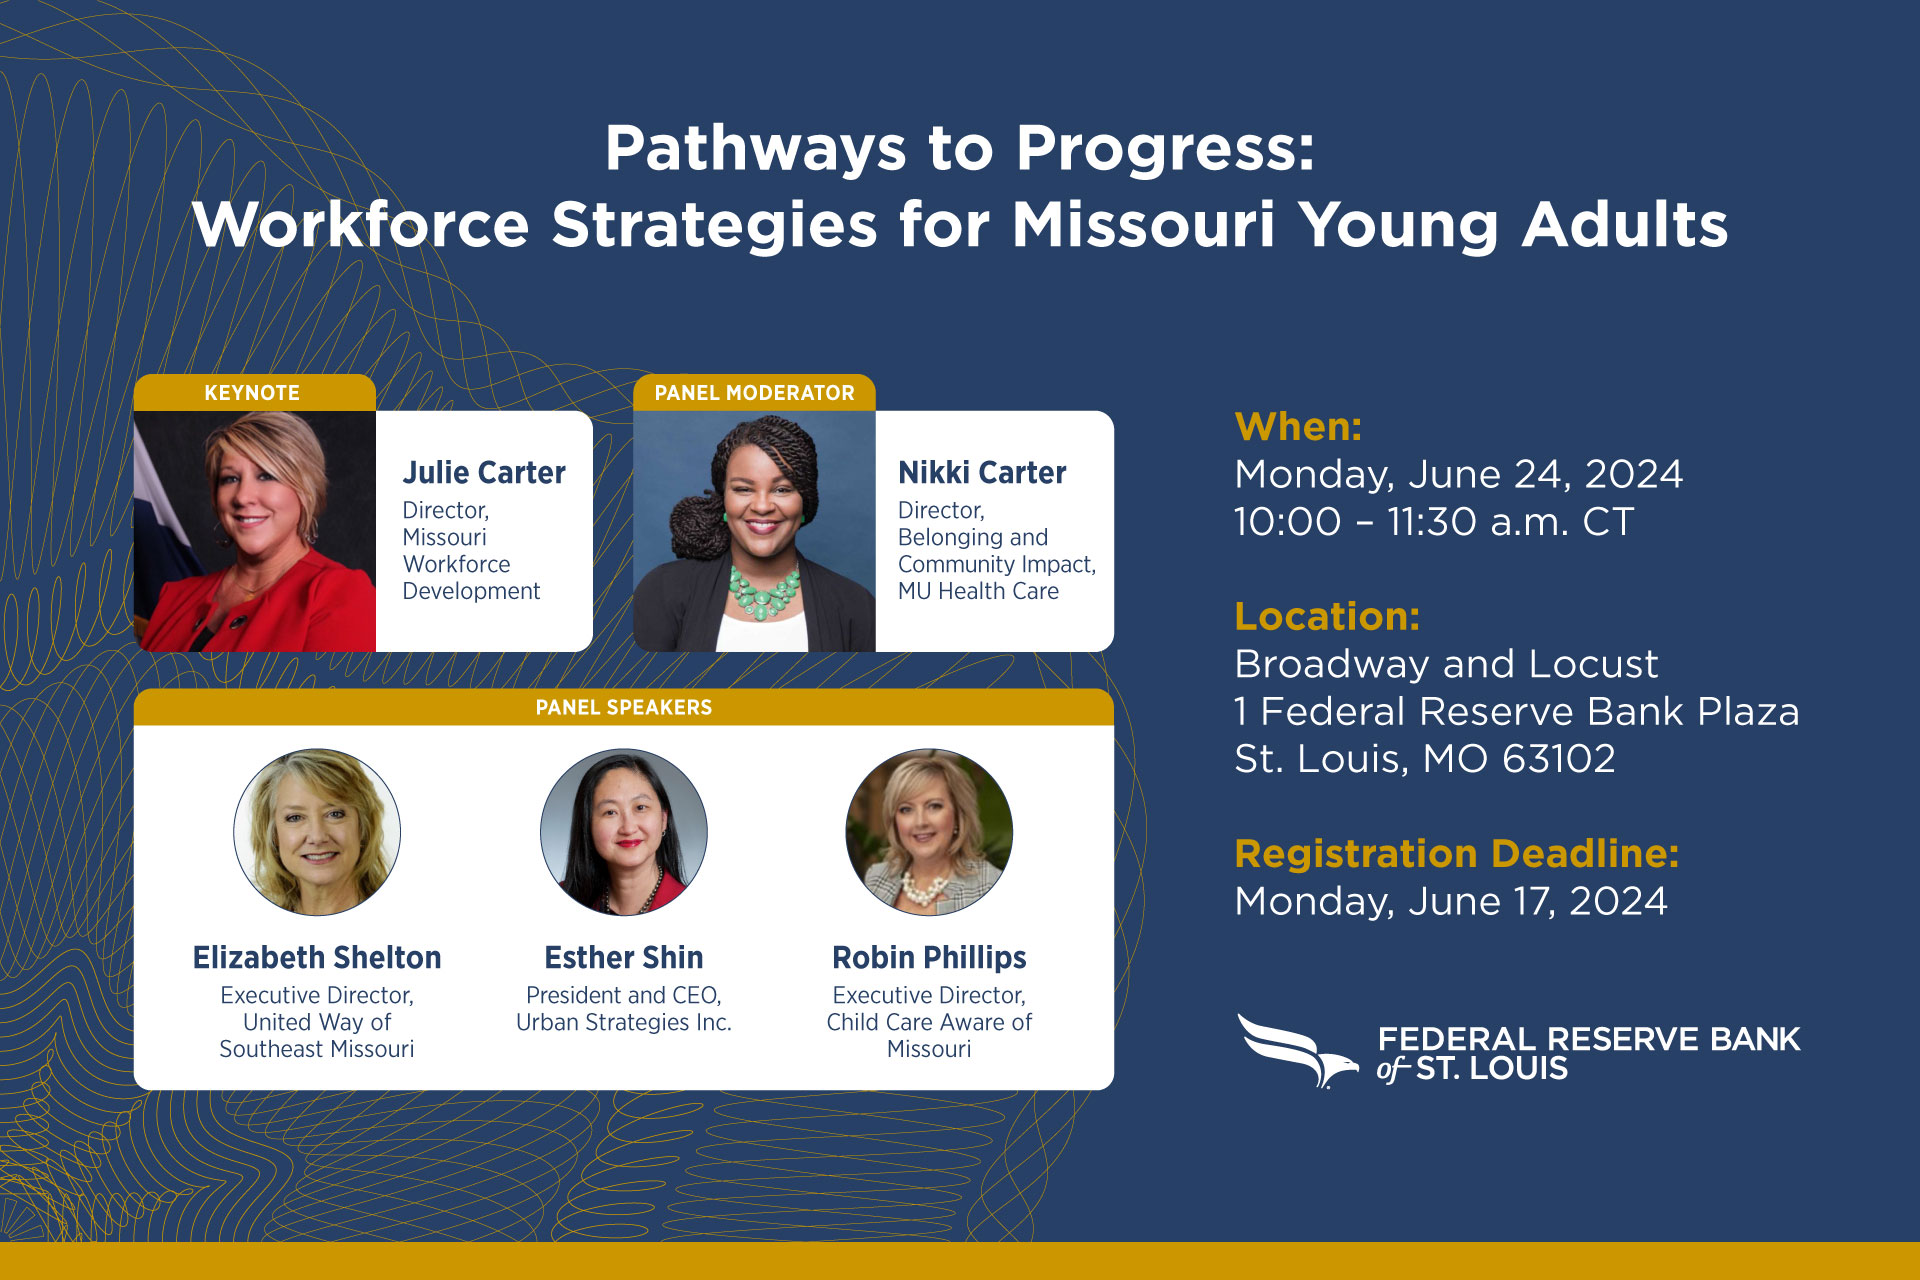 A group of diverse female professionals listed as a panel who will be discussing workforce strategies targeted for Missouri young adults.